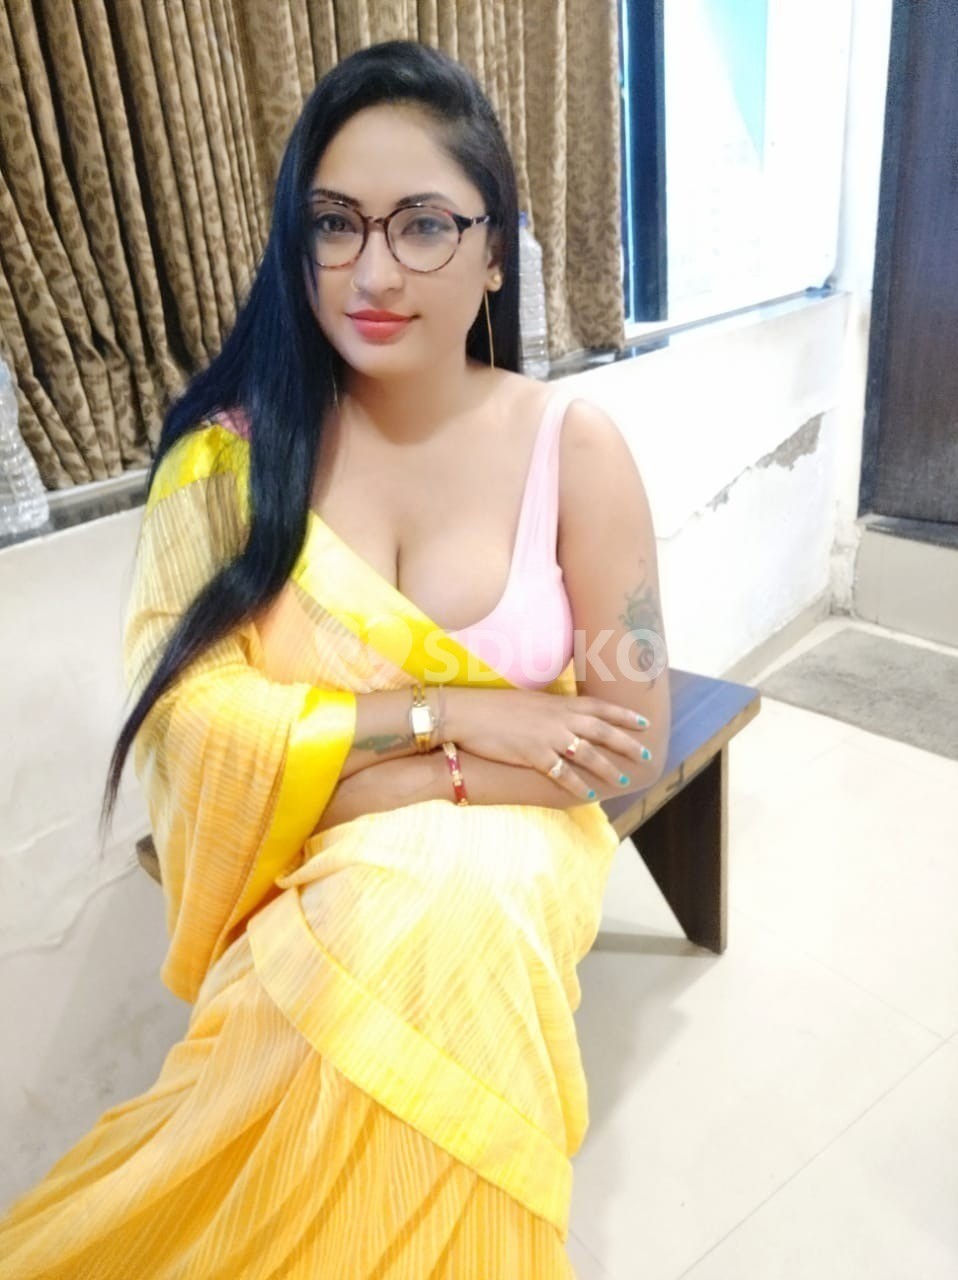 Muskhan Pandey LOW PRICE🔸✅ SERVICE AVAILABLE 100% SAFE AND SECURE UNLIMITED ENJOY HOT COLLEGE GIRL HOUSEWIFE AUNTIE